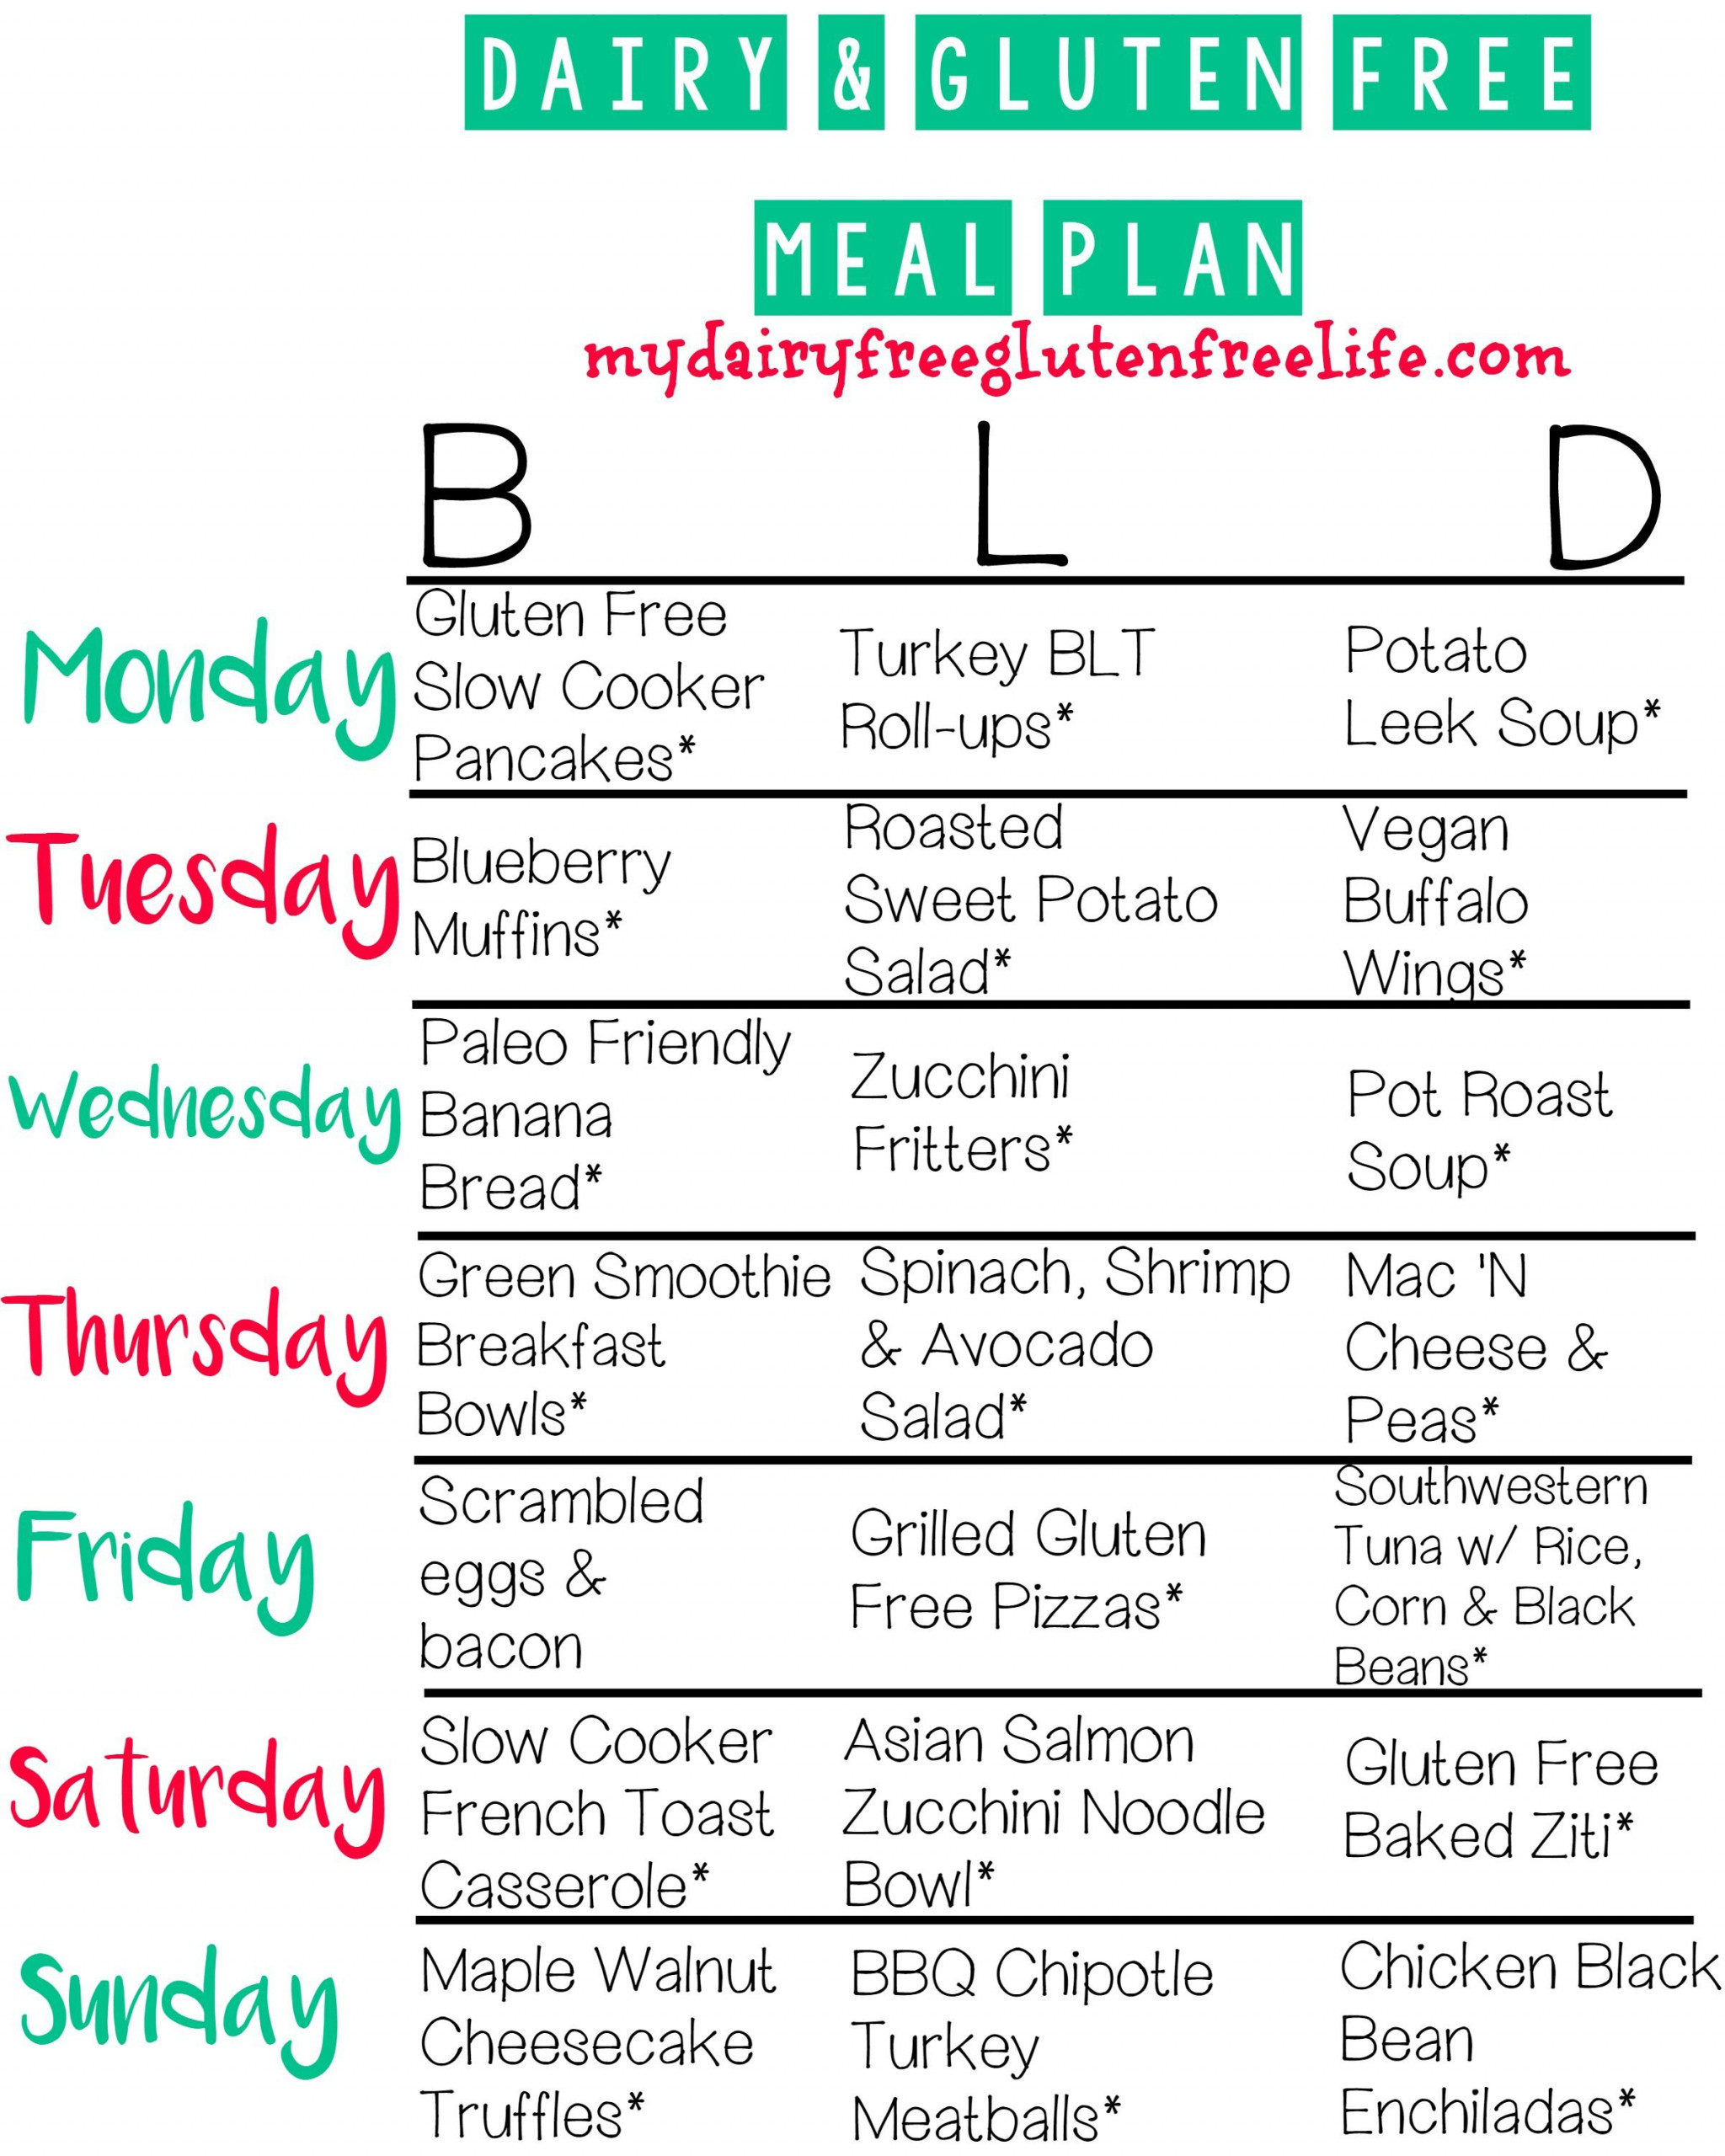 7 Day Dairy Gluten Free Meal Plan With Recipes Gluten ...